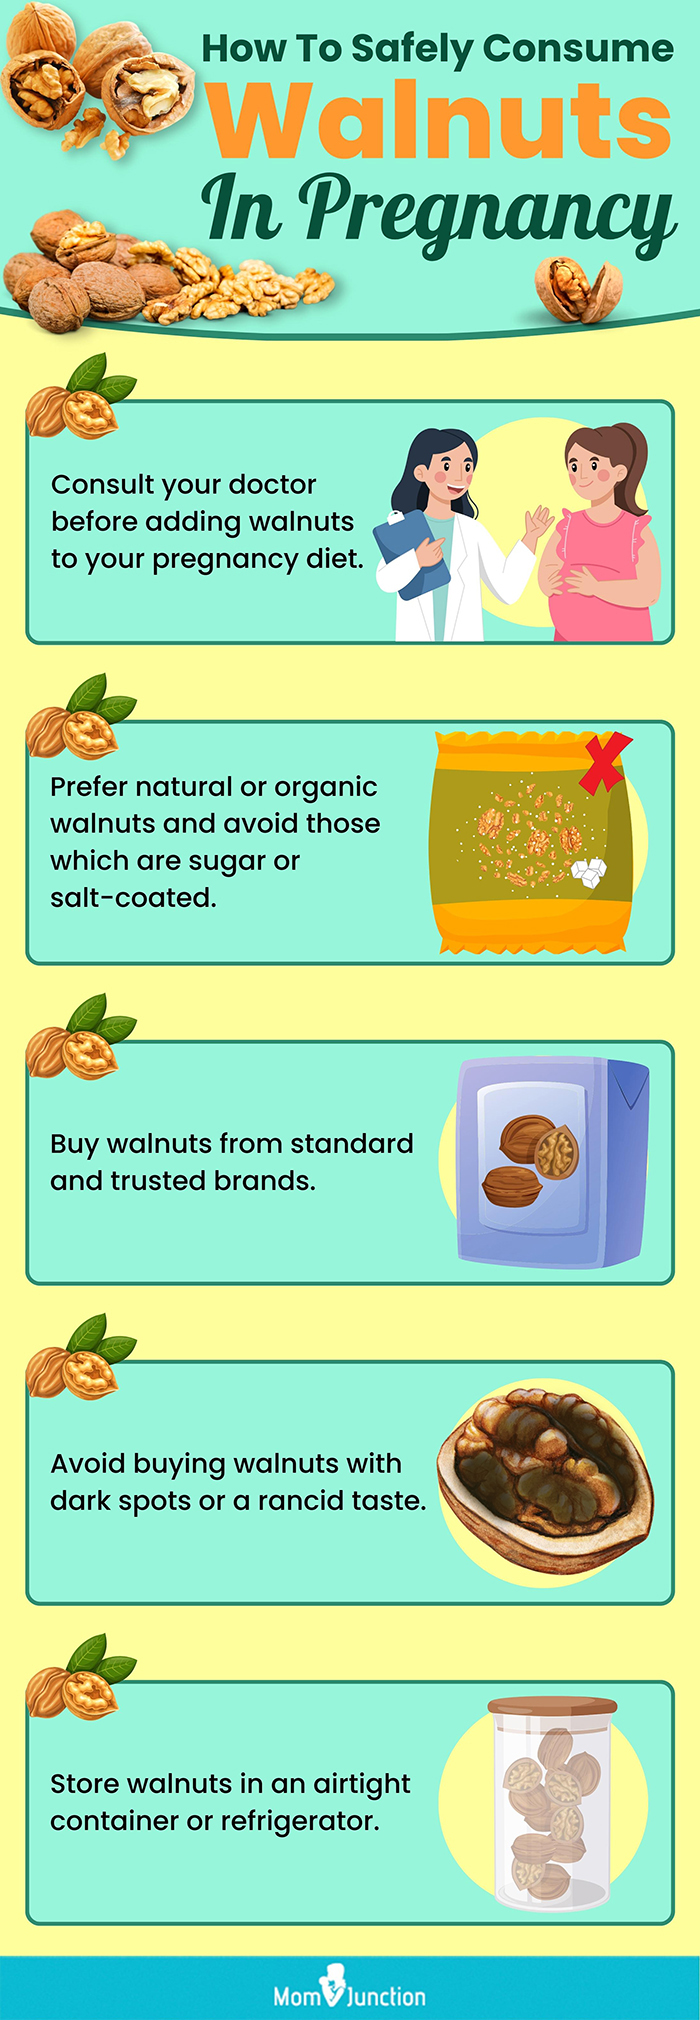 how to safely consume walnuts in pregnancy [infographic]